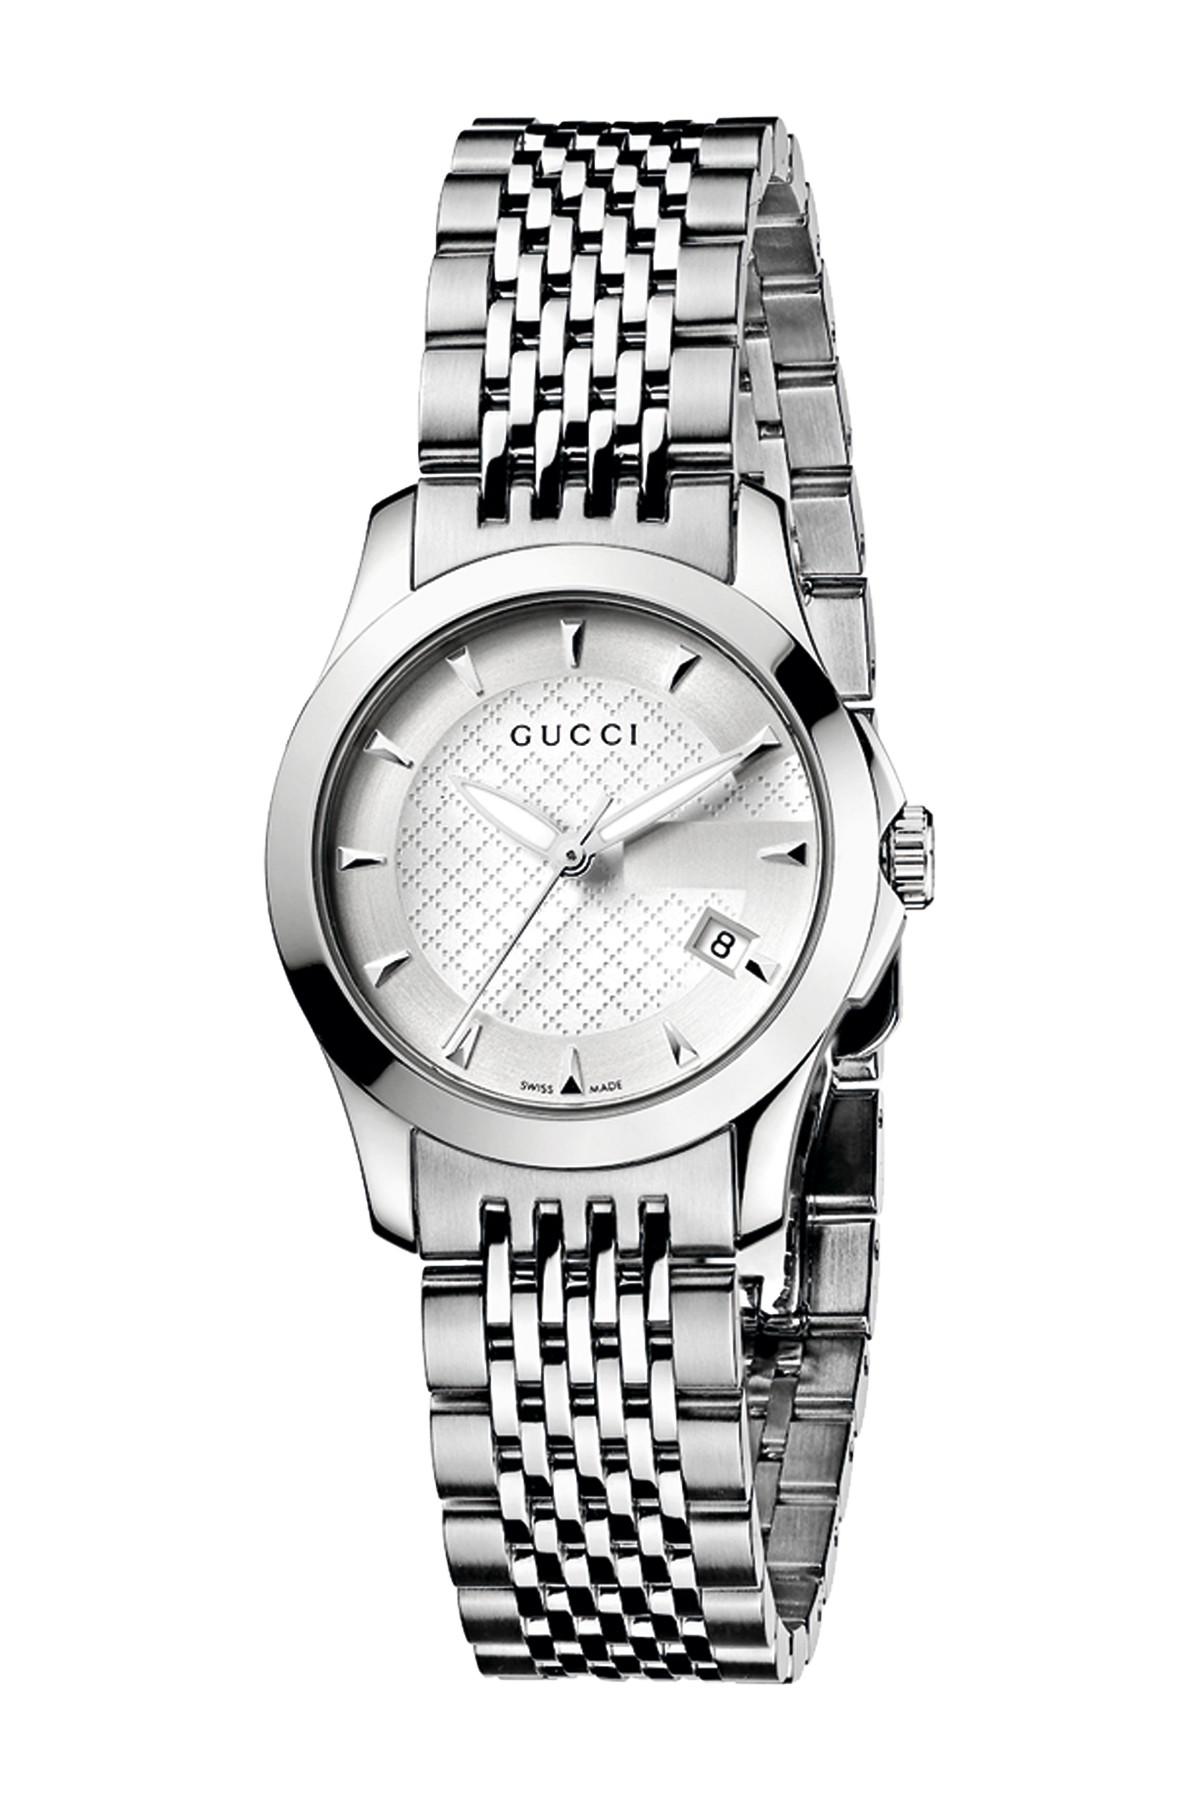 Gucci G Timeless Ladies Watch in Silver Tone (Metallic) - Lyst